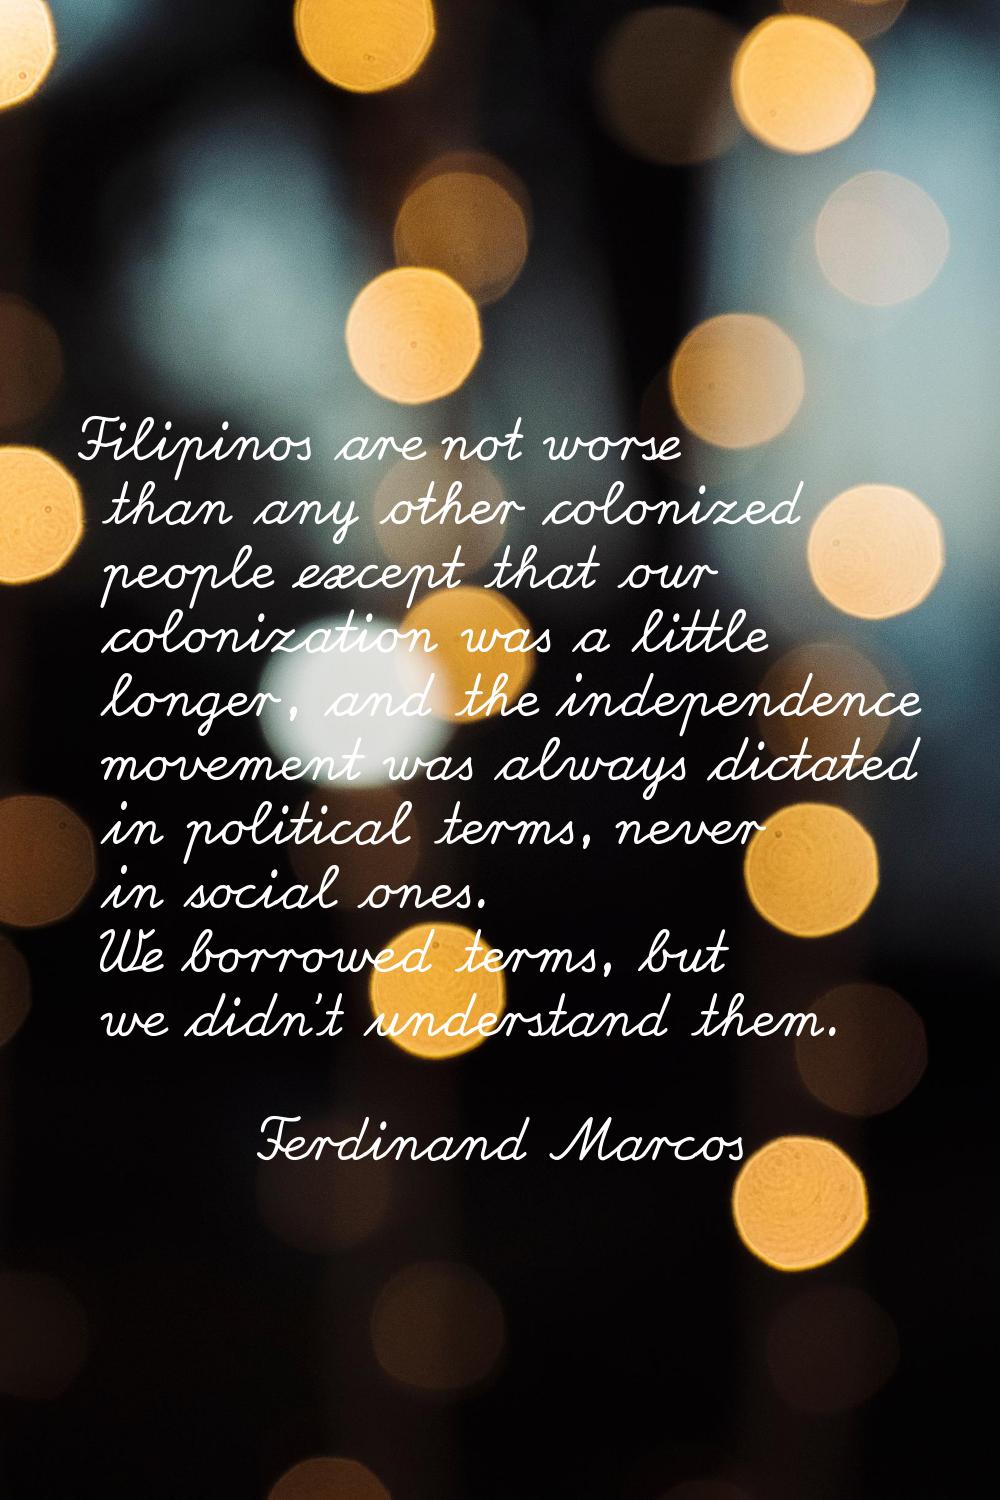 Filipinos are not worse than any other colonized people except that our colonization was a little l